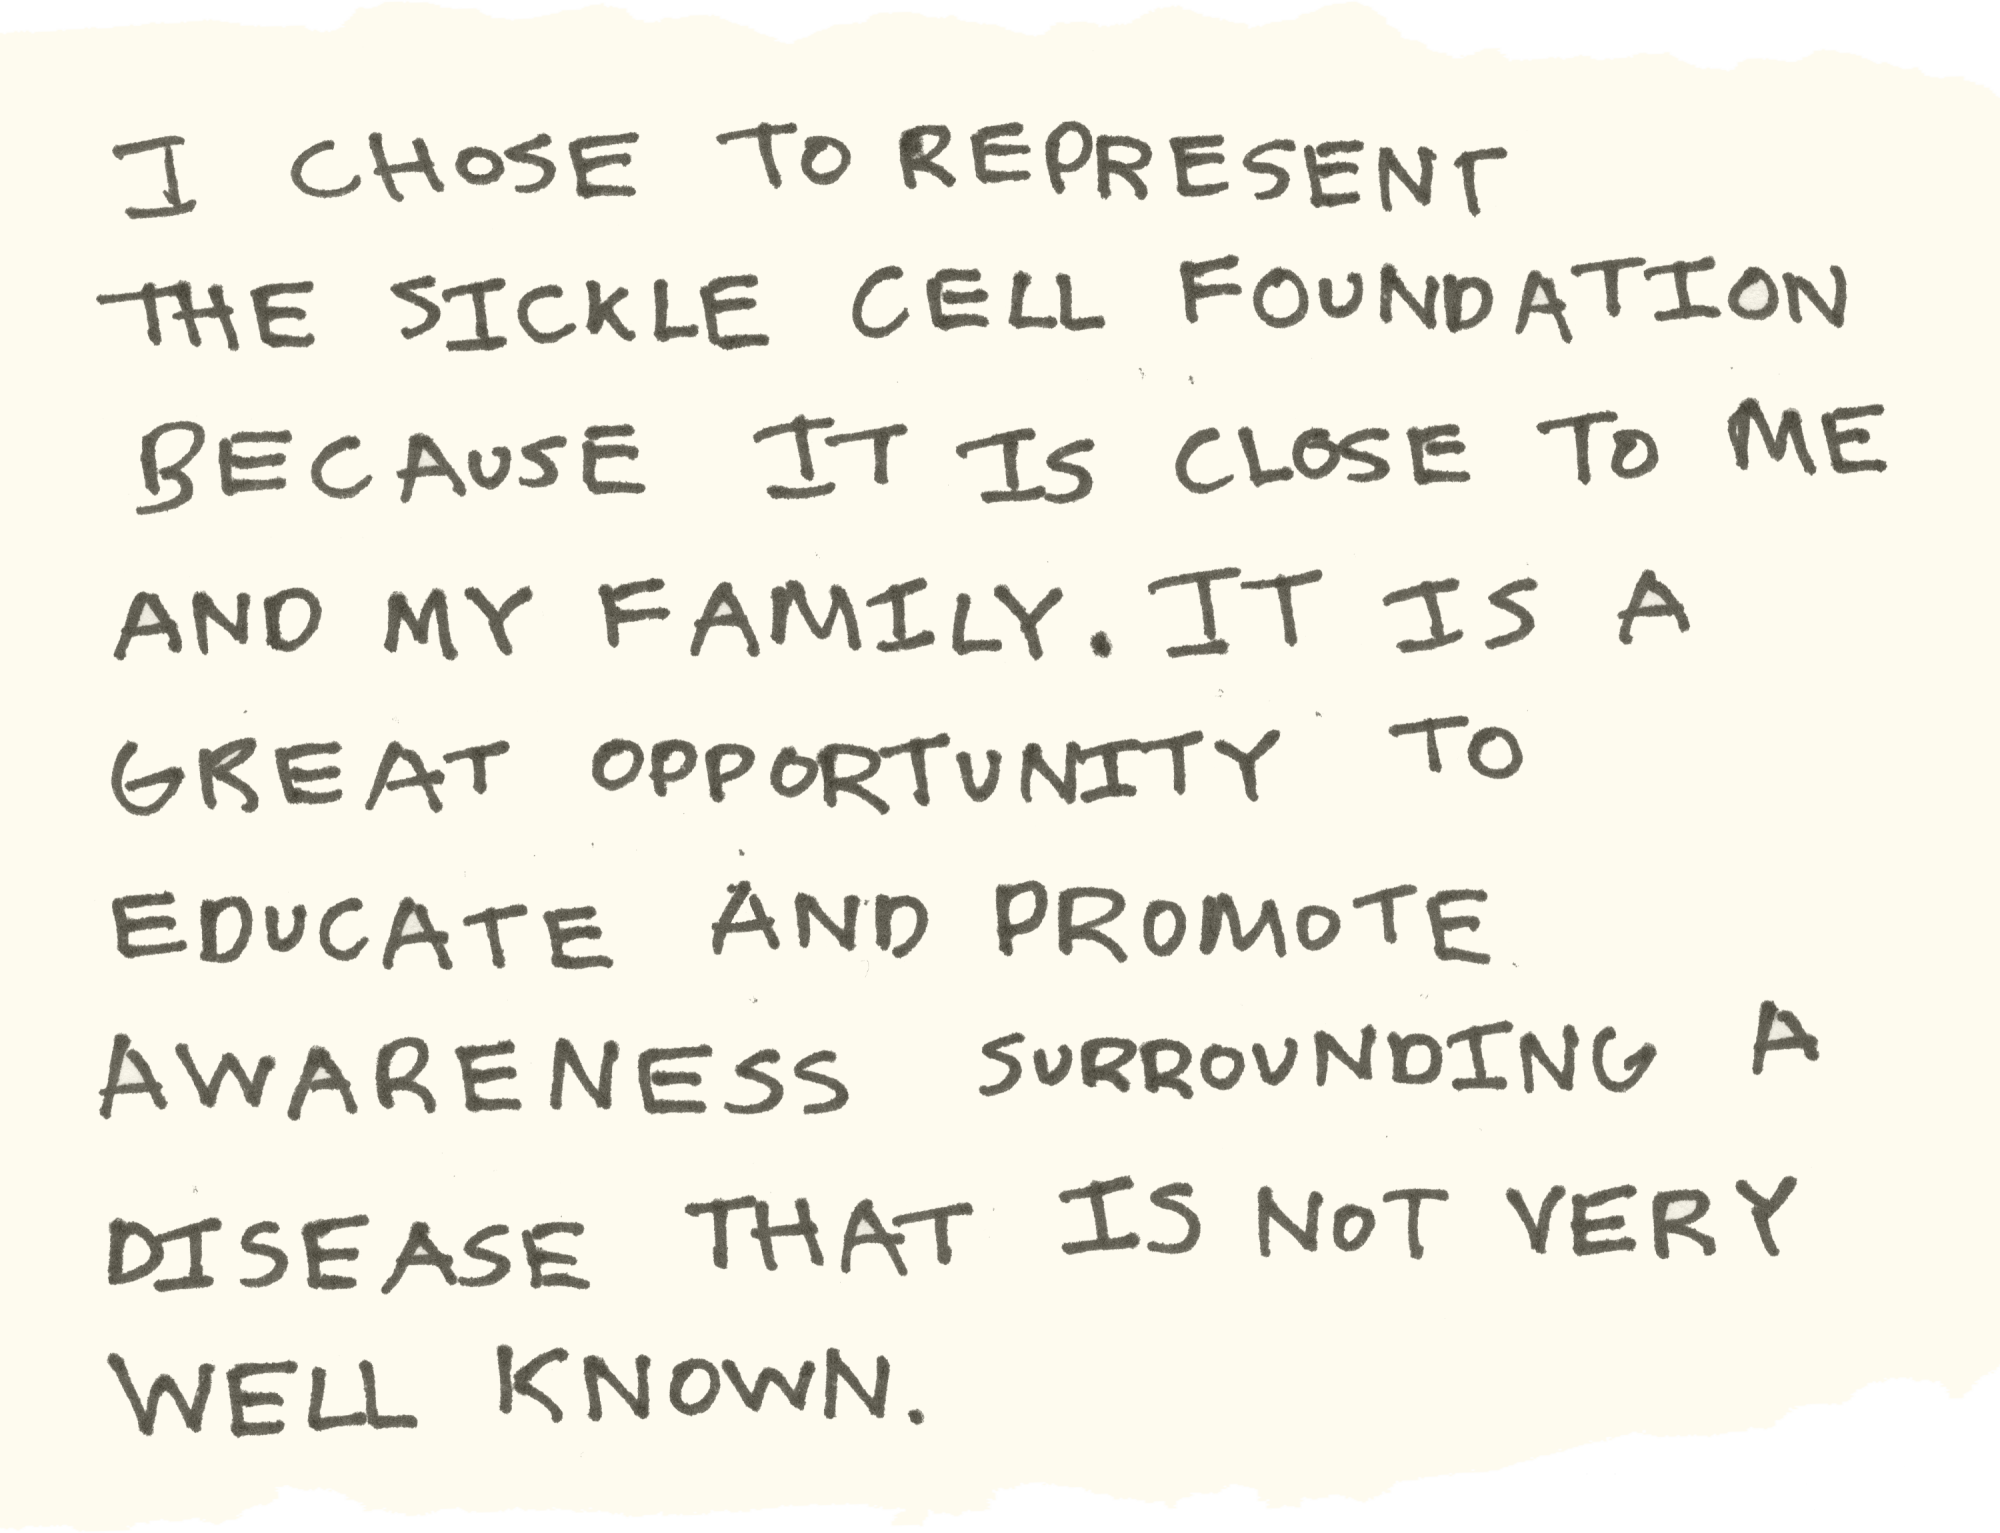 I chose to represent the sickle cell foundation because it is close to me and my family